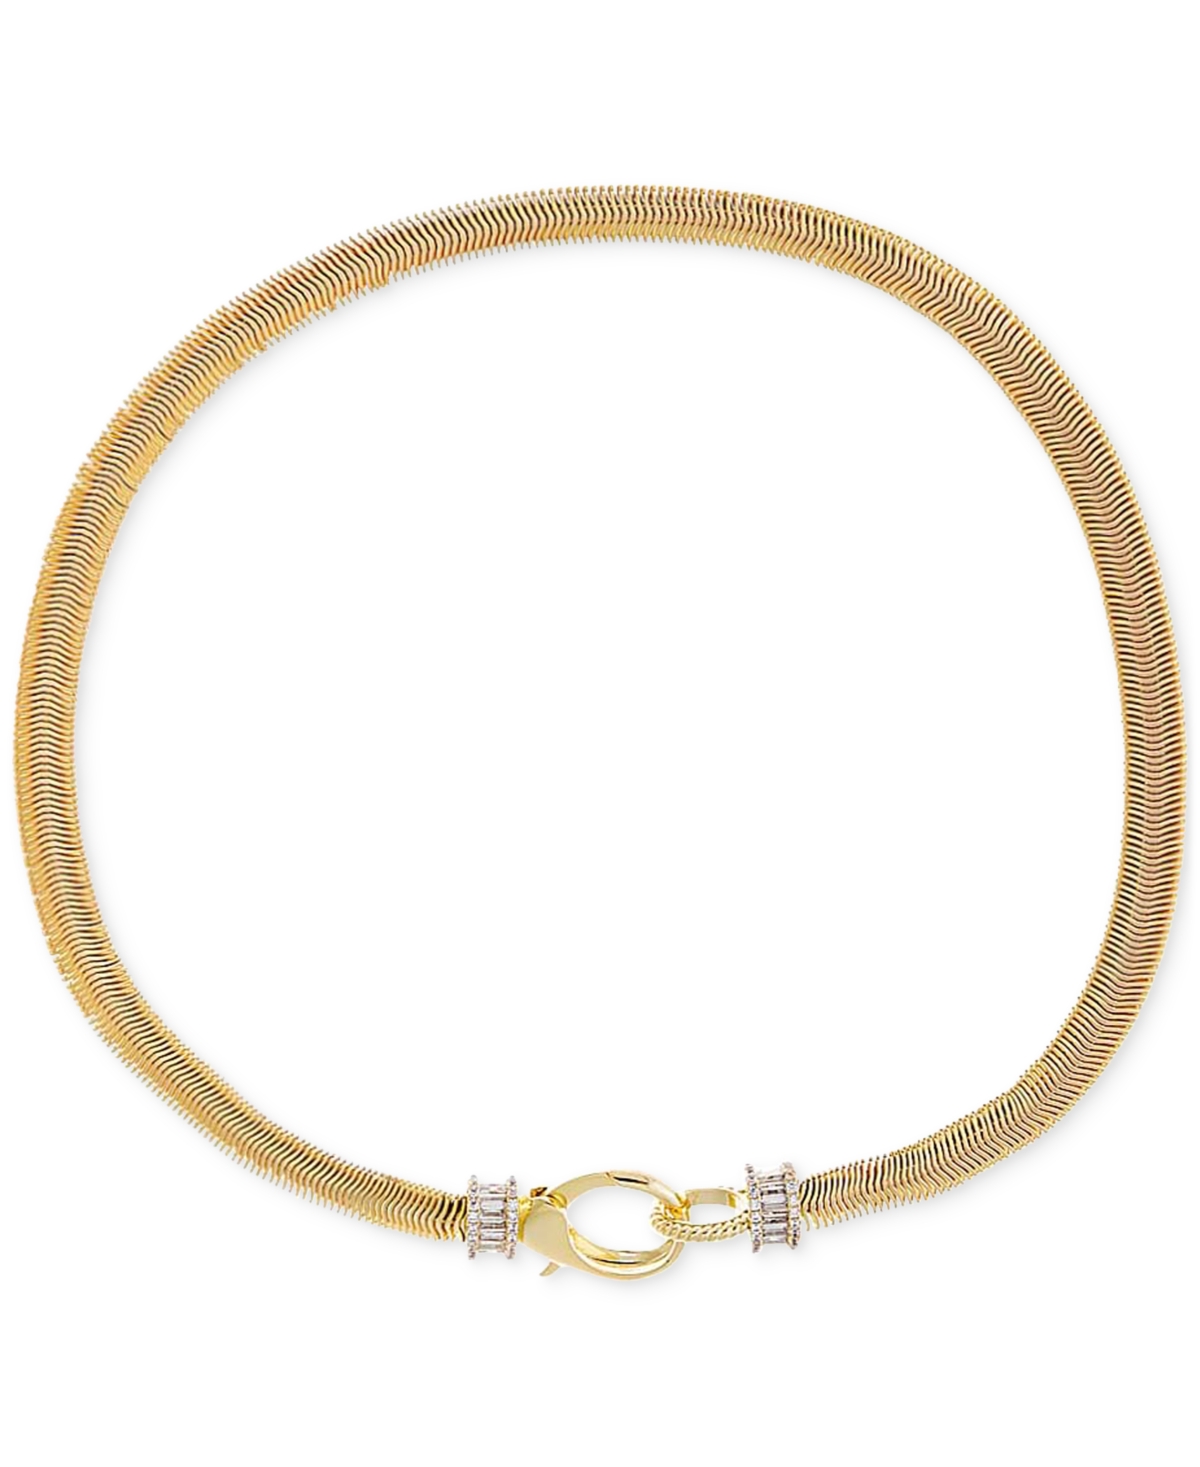 14k Gold-Plated Baguette Cubic Zirconia Bead Snake Chain 16" Collar Necklace - Gold